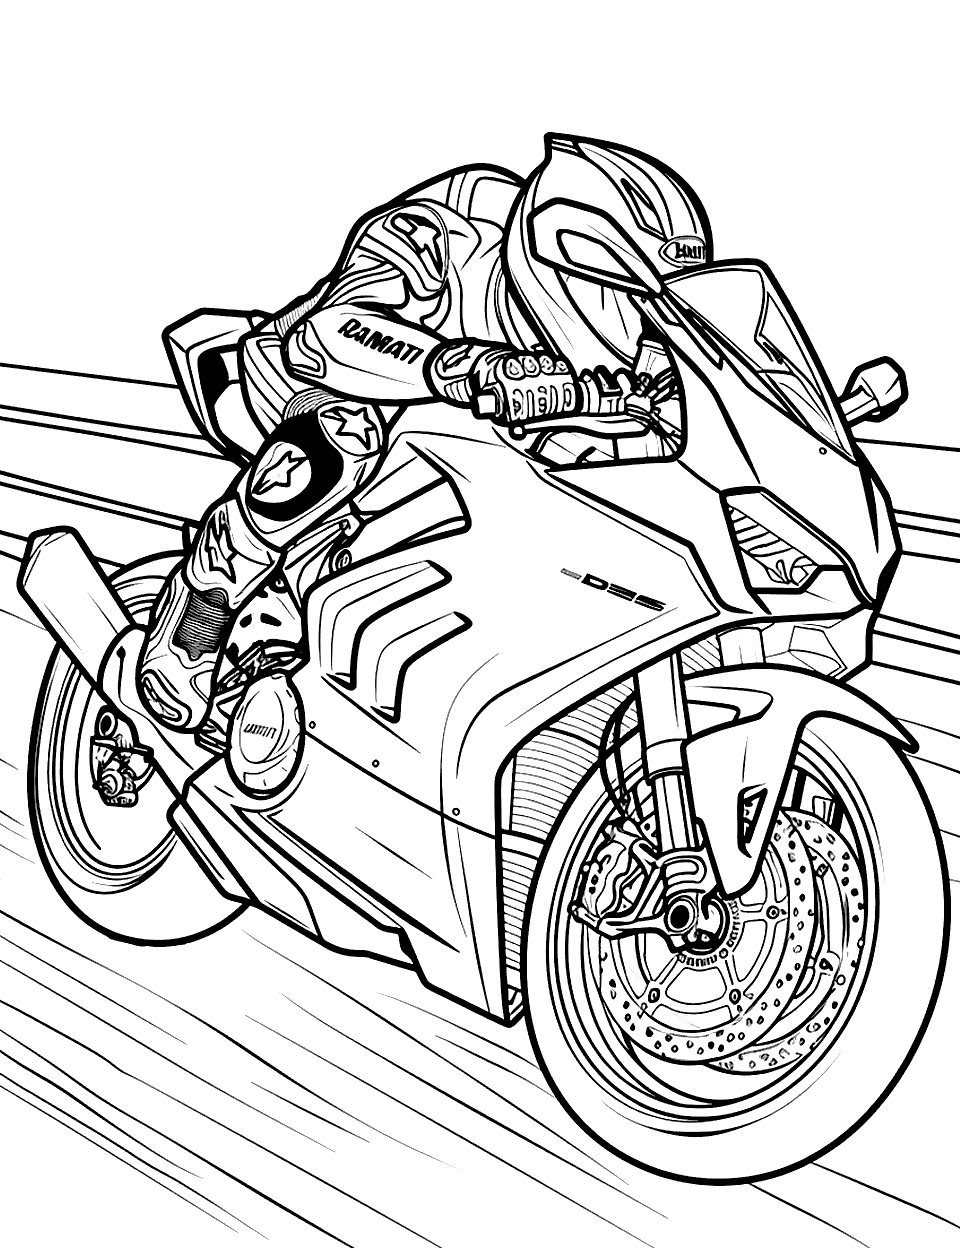 Ducati Performance Motorcycle Coloring Page - A Ducati motorcycle leaned into a sharp corner on a race track.